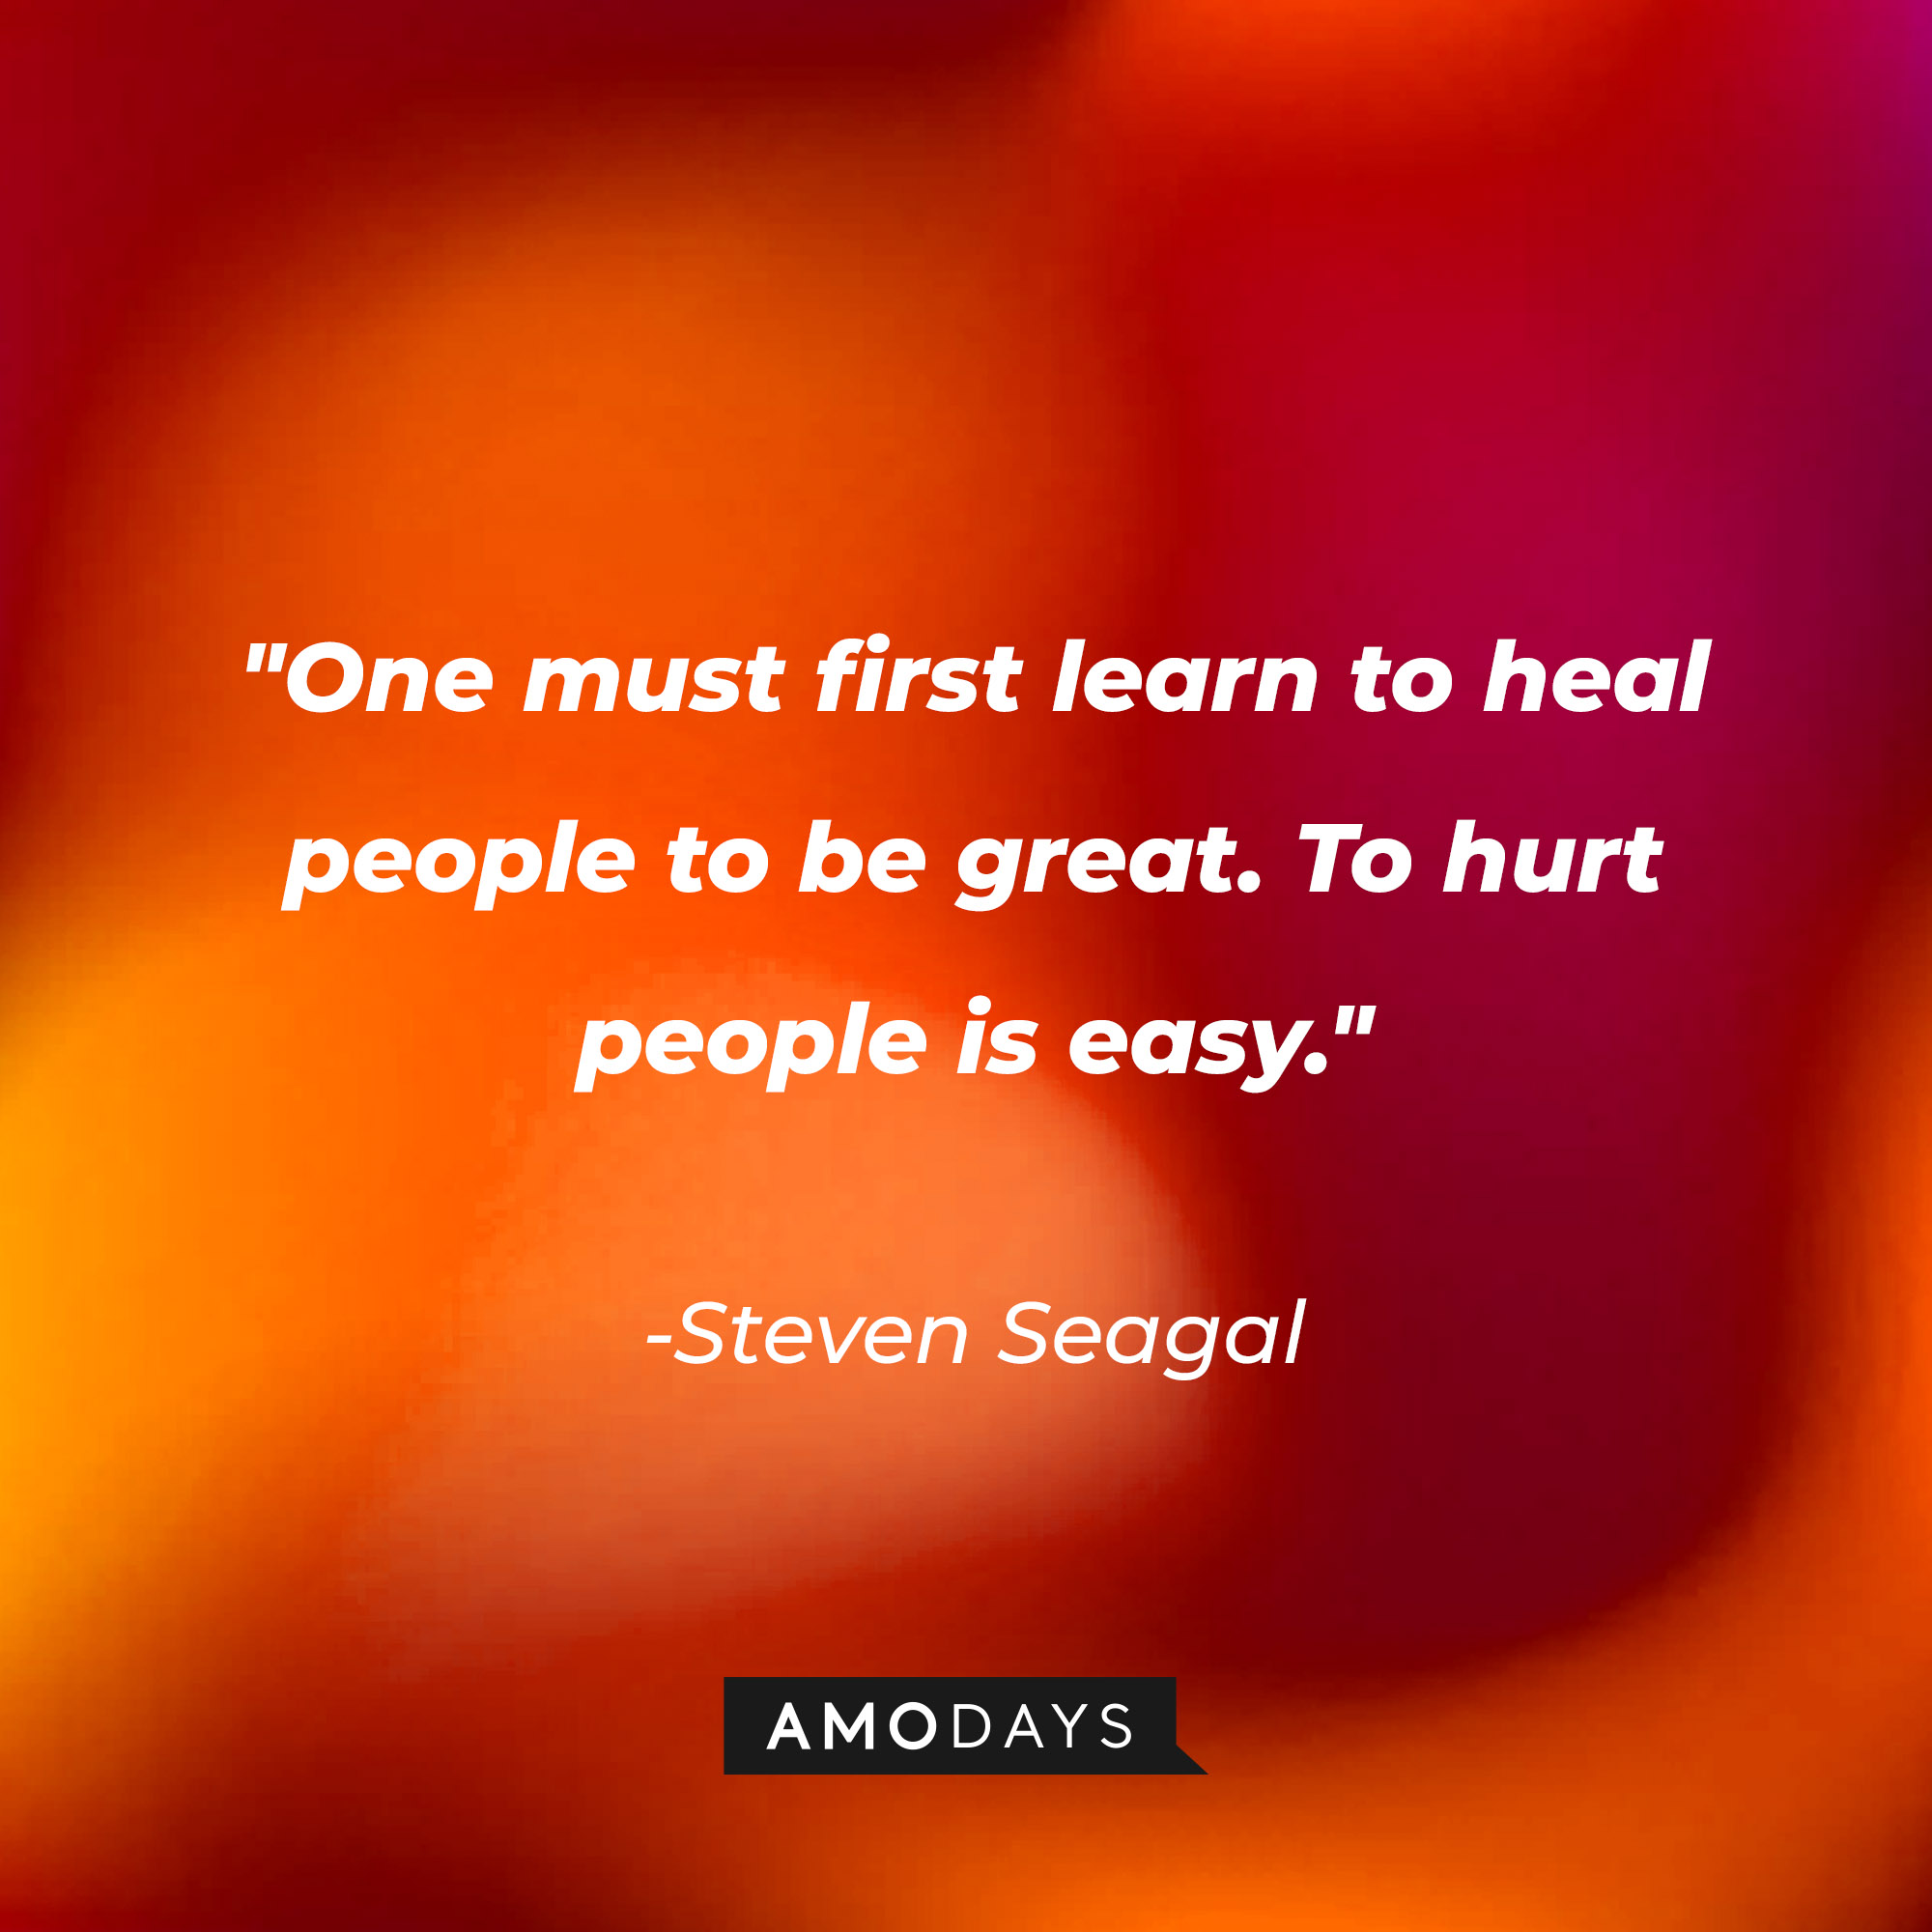 Steven Seagal’s quote: "One must first learn to heal people to be great. To hurt people is easy." | Image: AmoDays